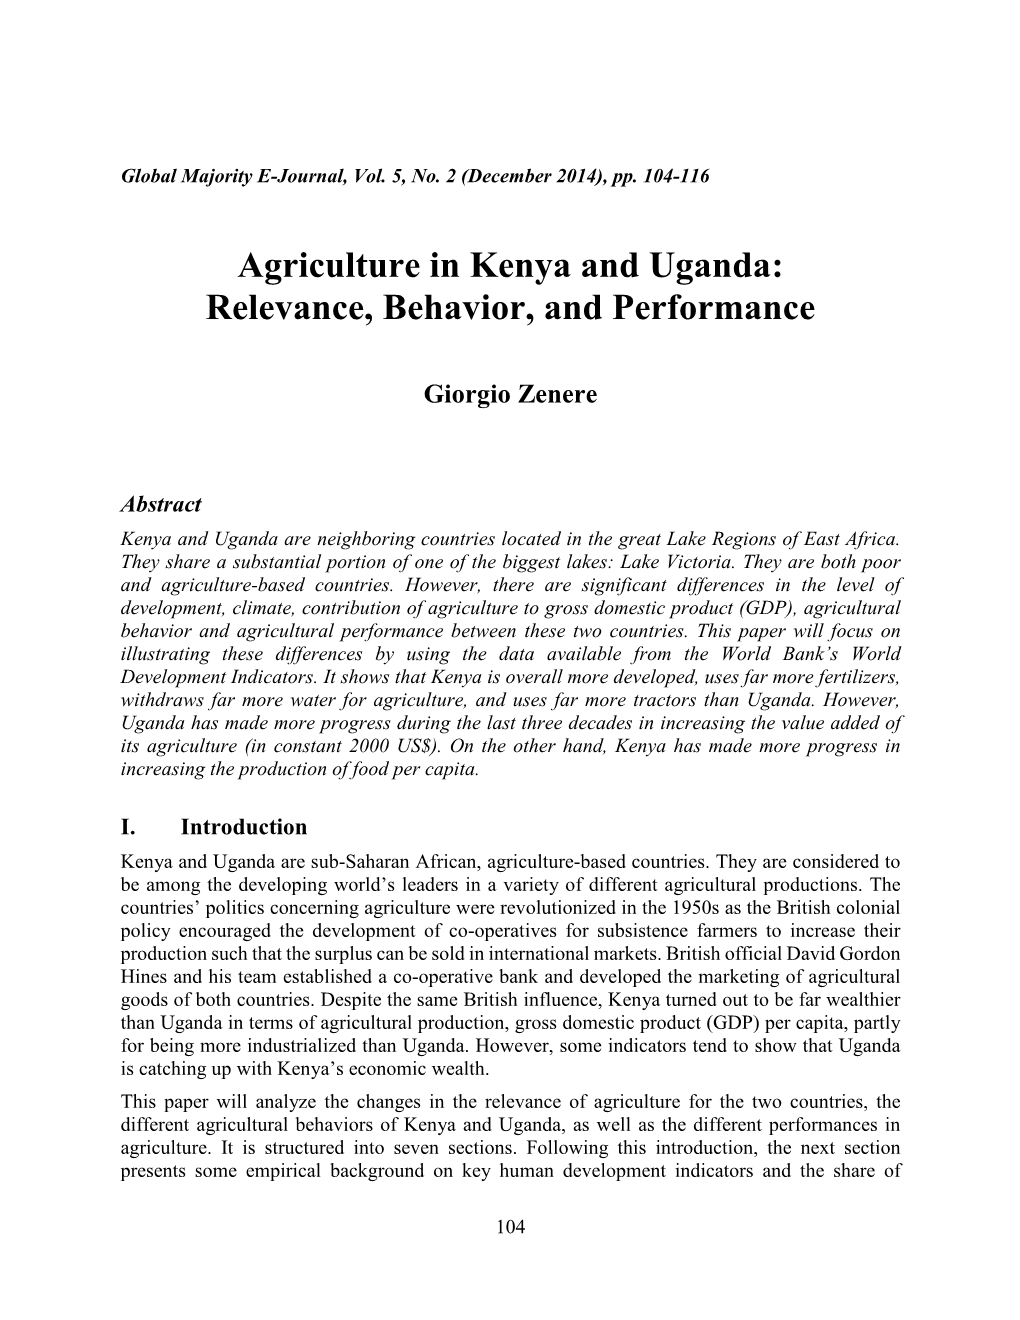 Agriculture in Kenya and Uganda: Relevance, Behavior, and Performance